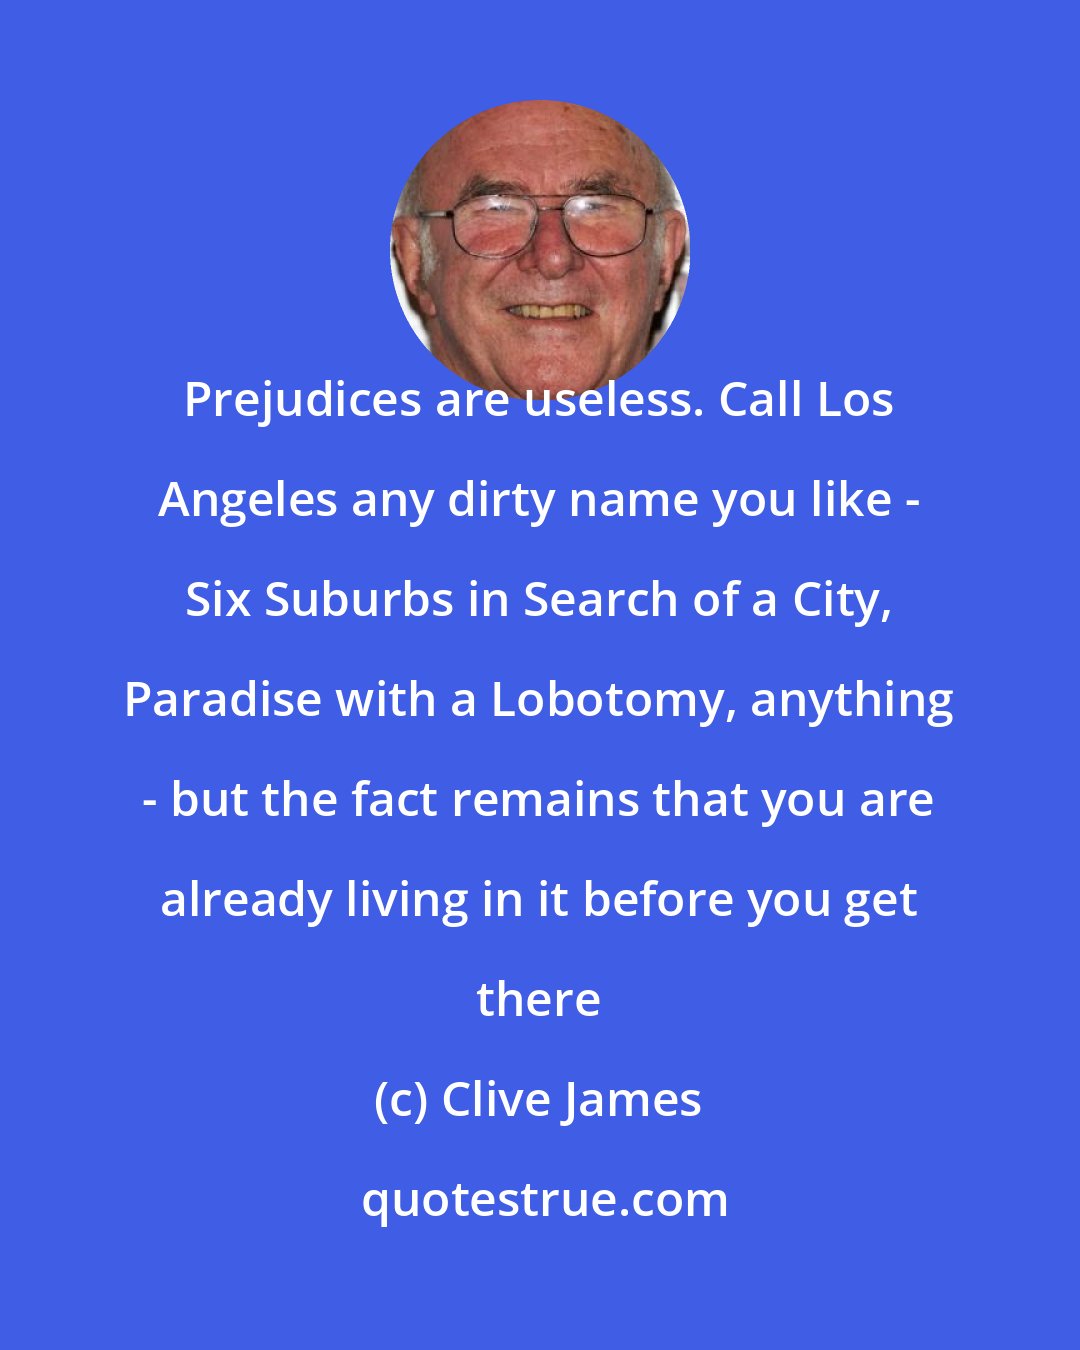 Clive James: Prejudices are useless. Call Los Angeles any dirty name you like - Six Suburbs in Search of a City, Paradise with a Lobotomy, anything - but the fact remains that you are already living in it before you get there